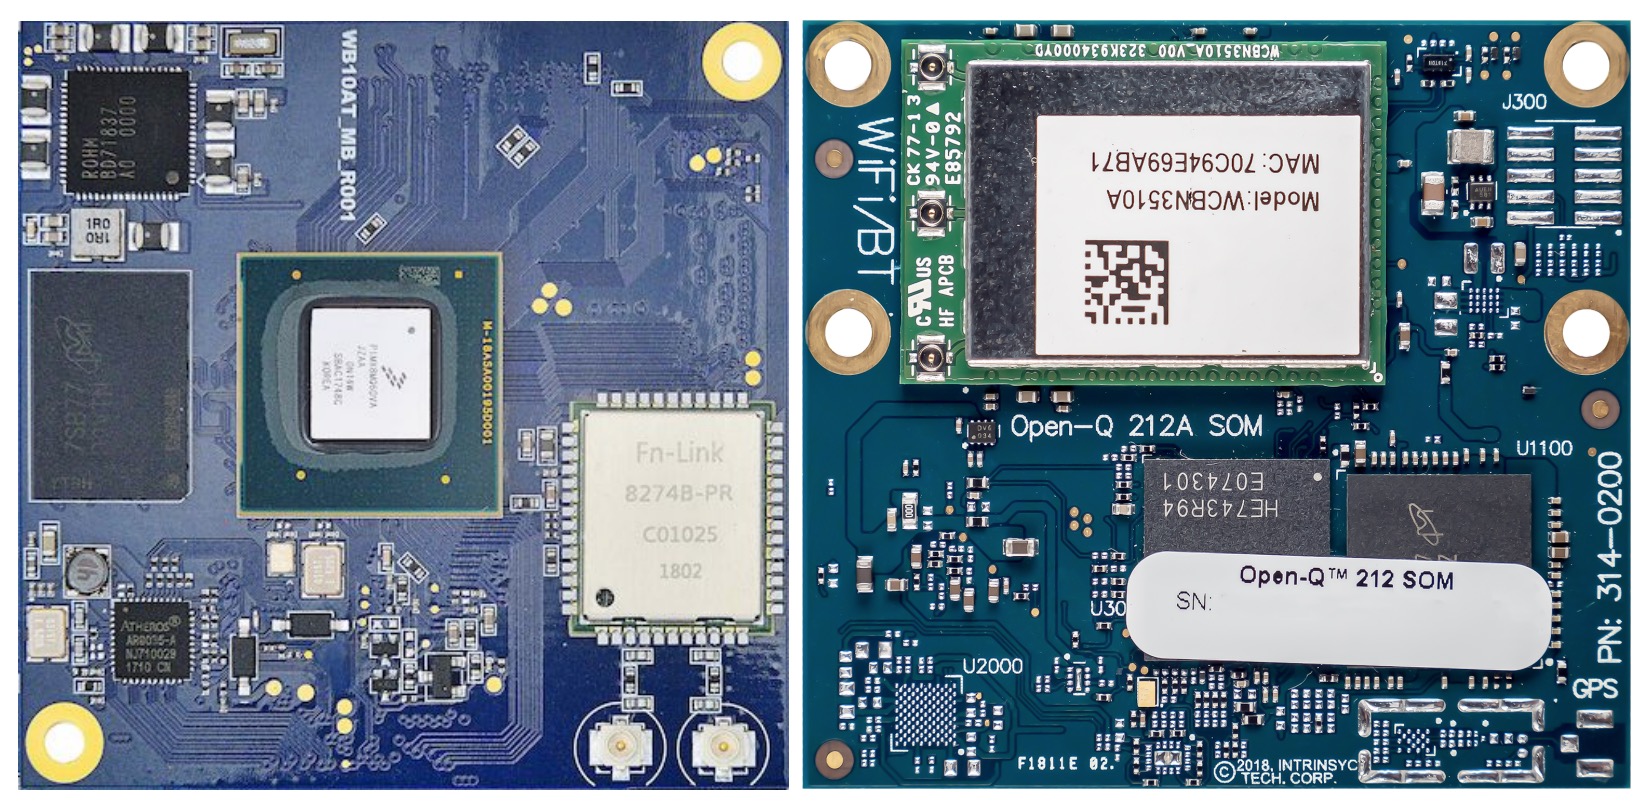 Qualcomm m7250. Qualcomm "som". Android things. Embedded os.